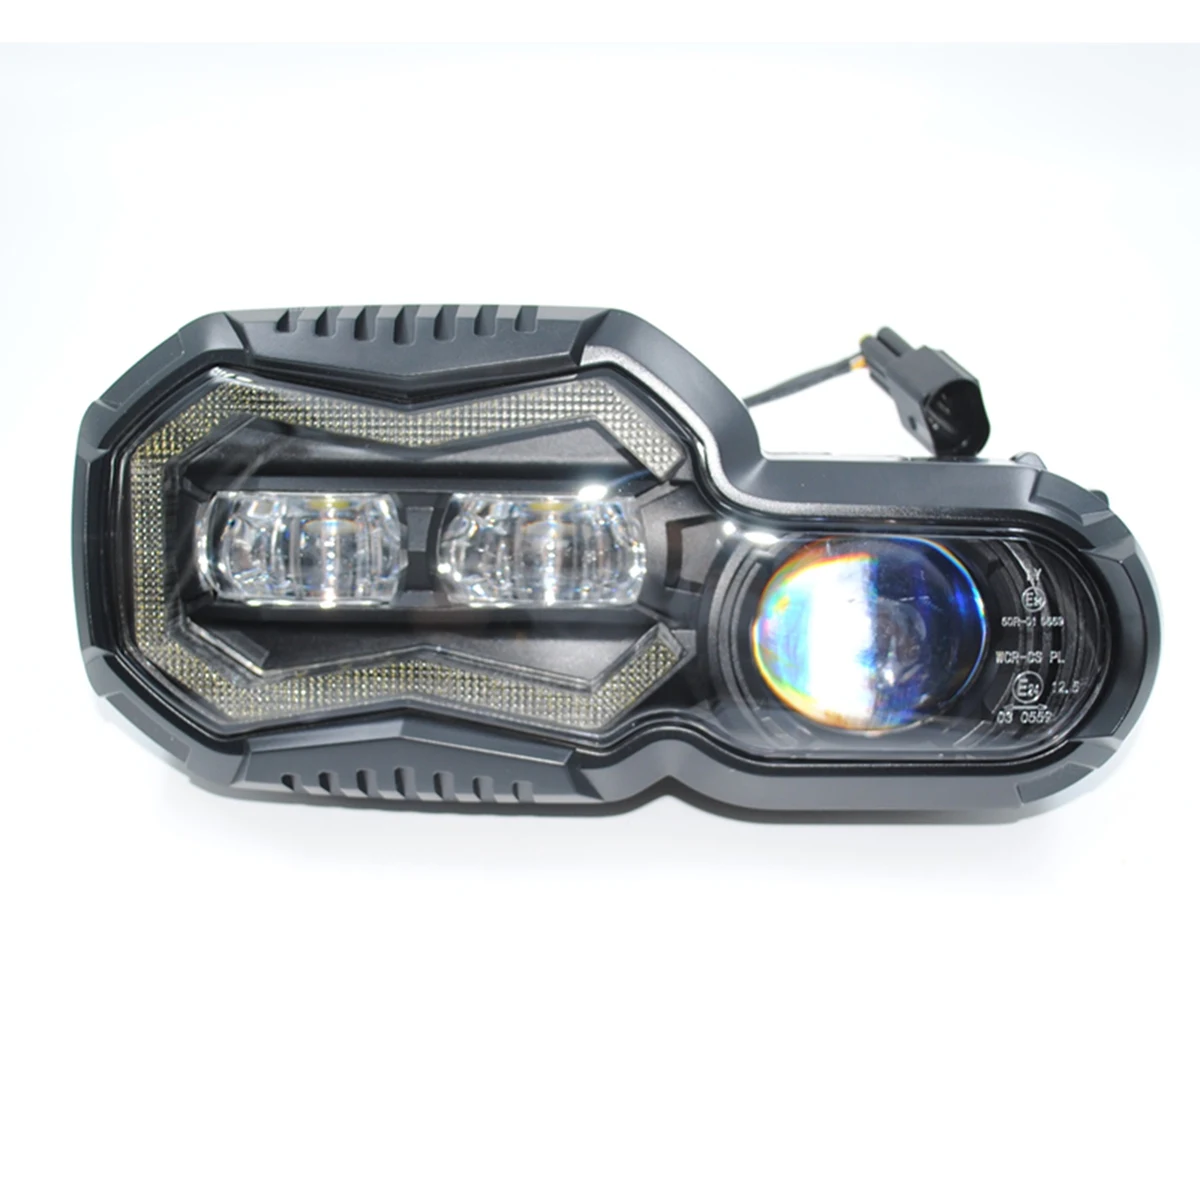 

Motorcycle LED Headlights for BMW F650GS F700GS F800GS ADV Adventure F800R Motorcycle Light LED Head Light Lamp Assembly